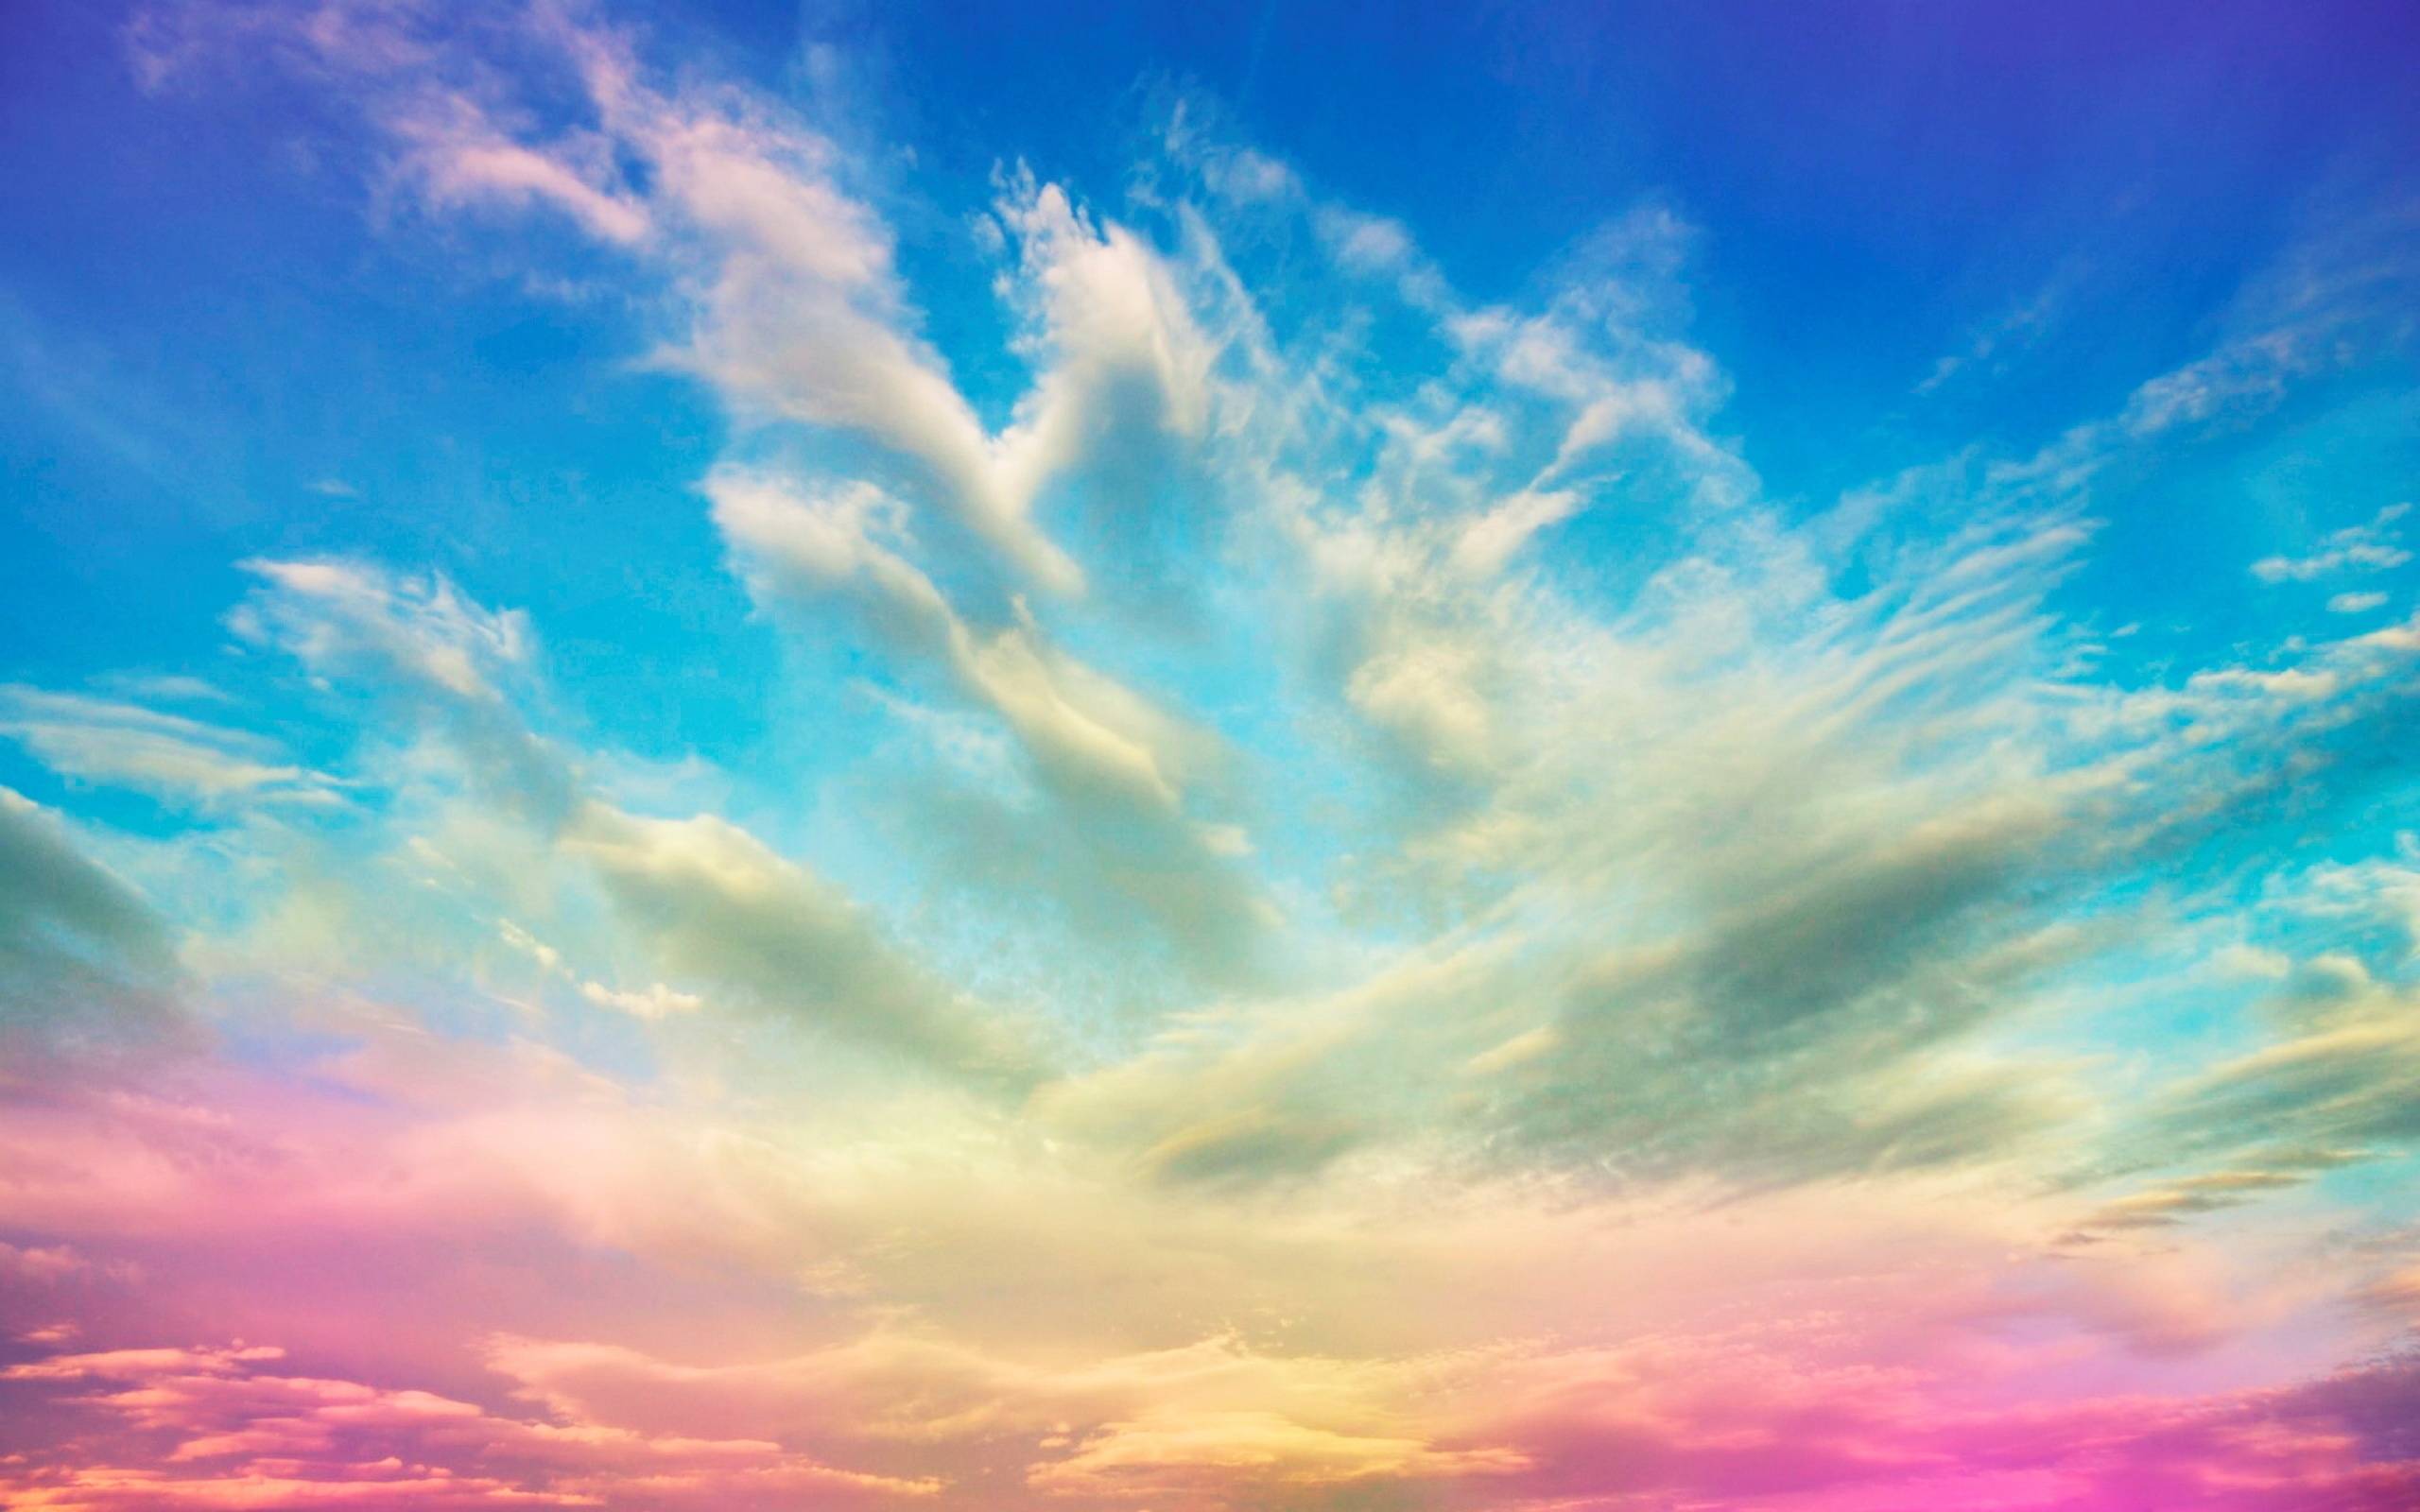 Multi Colored Sky Wallpaper And Image, Picture, Photo